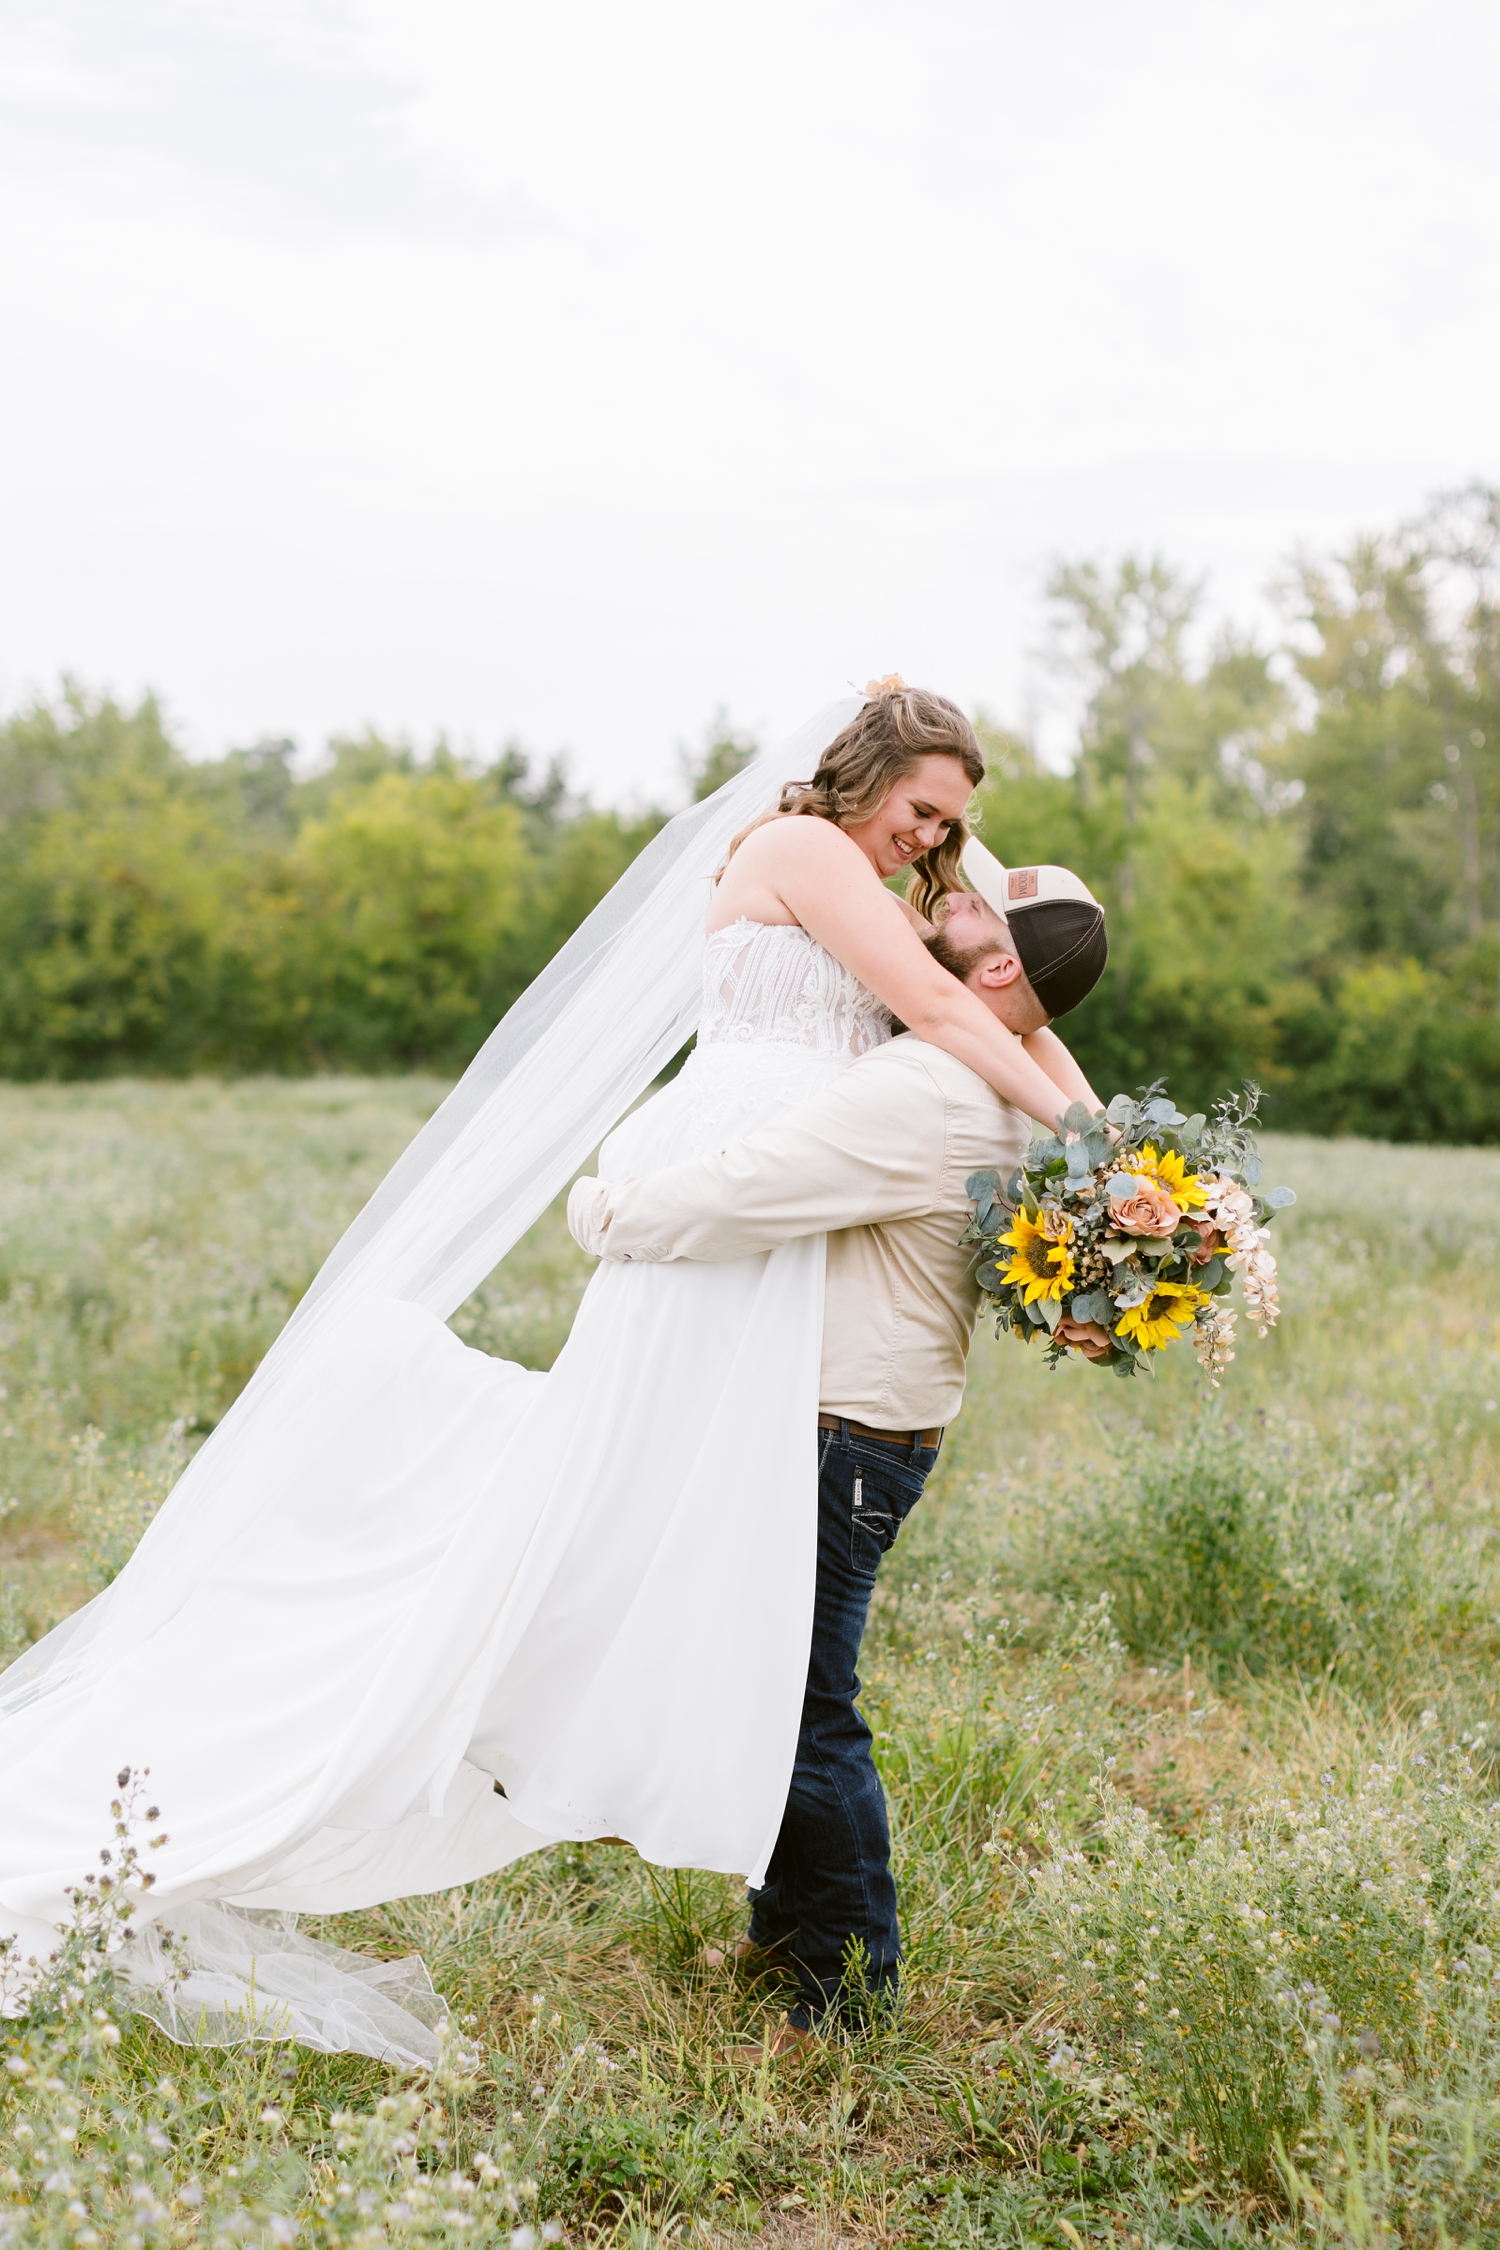 Matt picks up his new bride and spins her around in a grassy field in Knoxville, Iowa | CB Studio